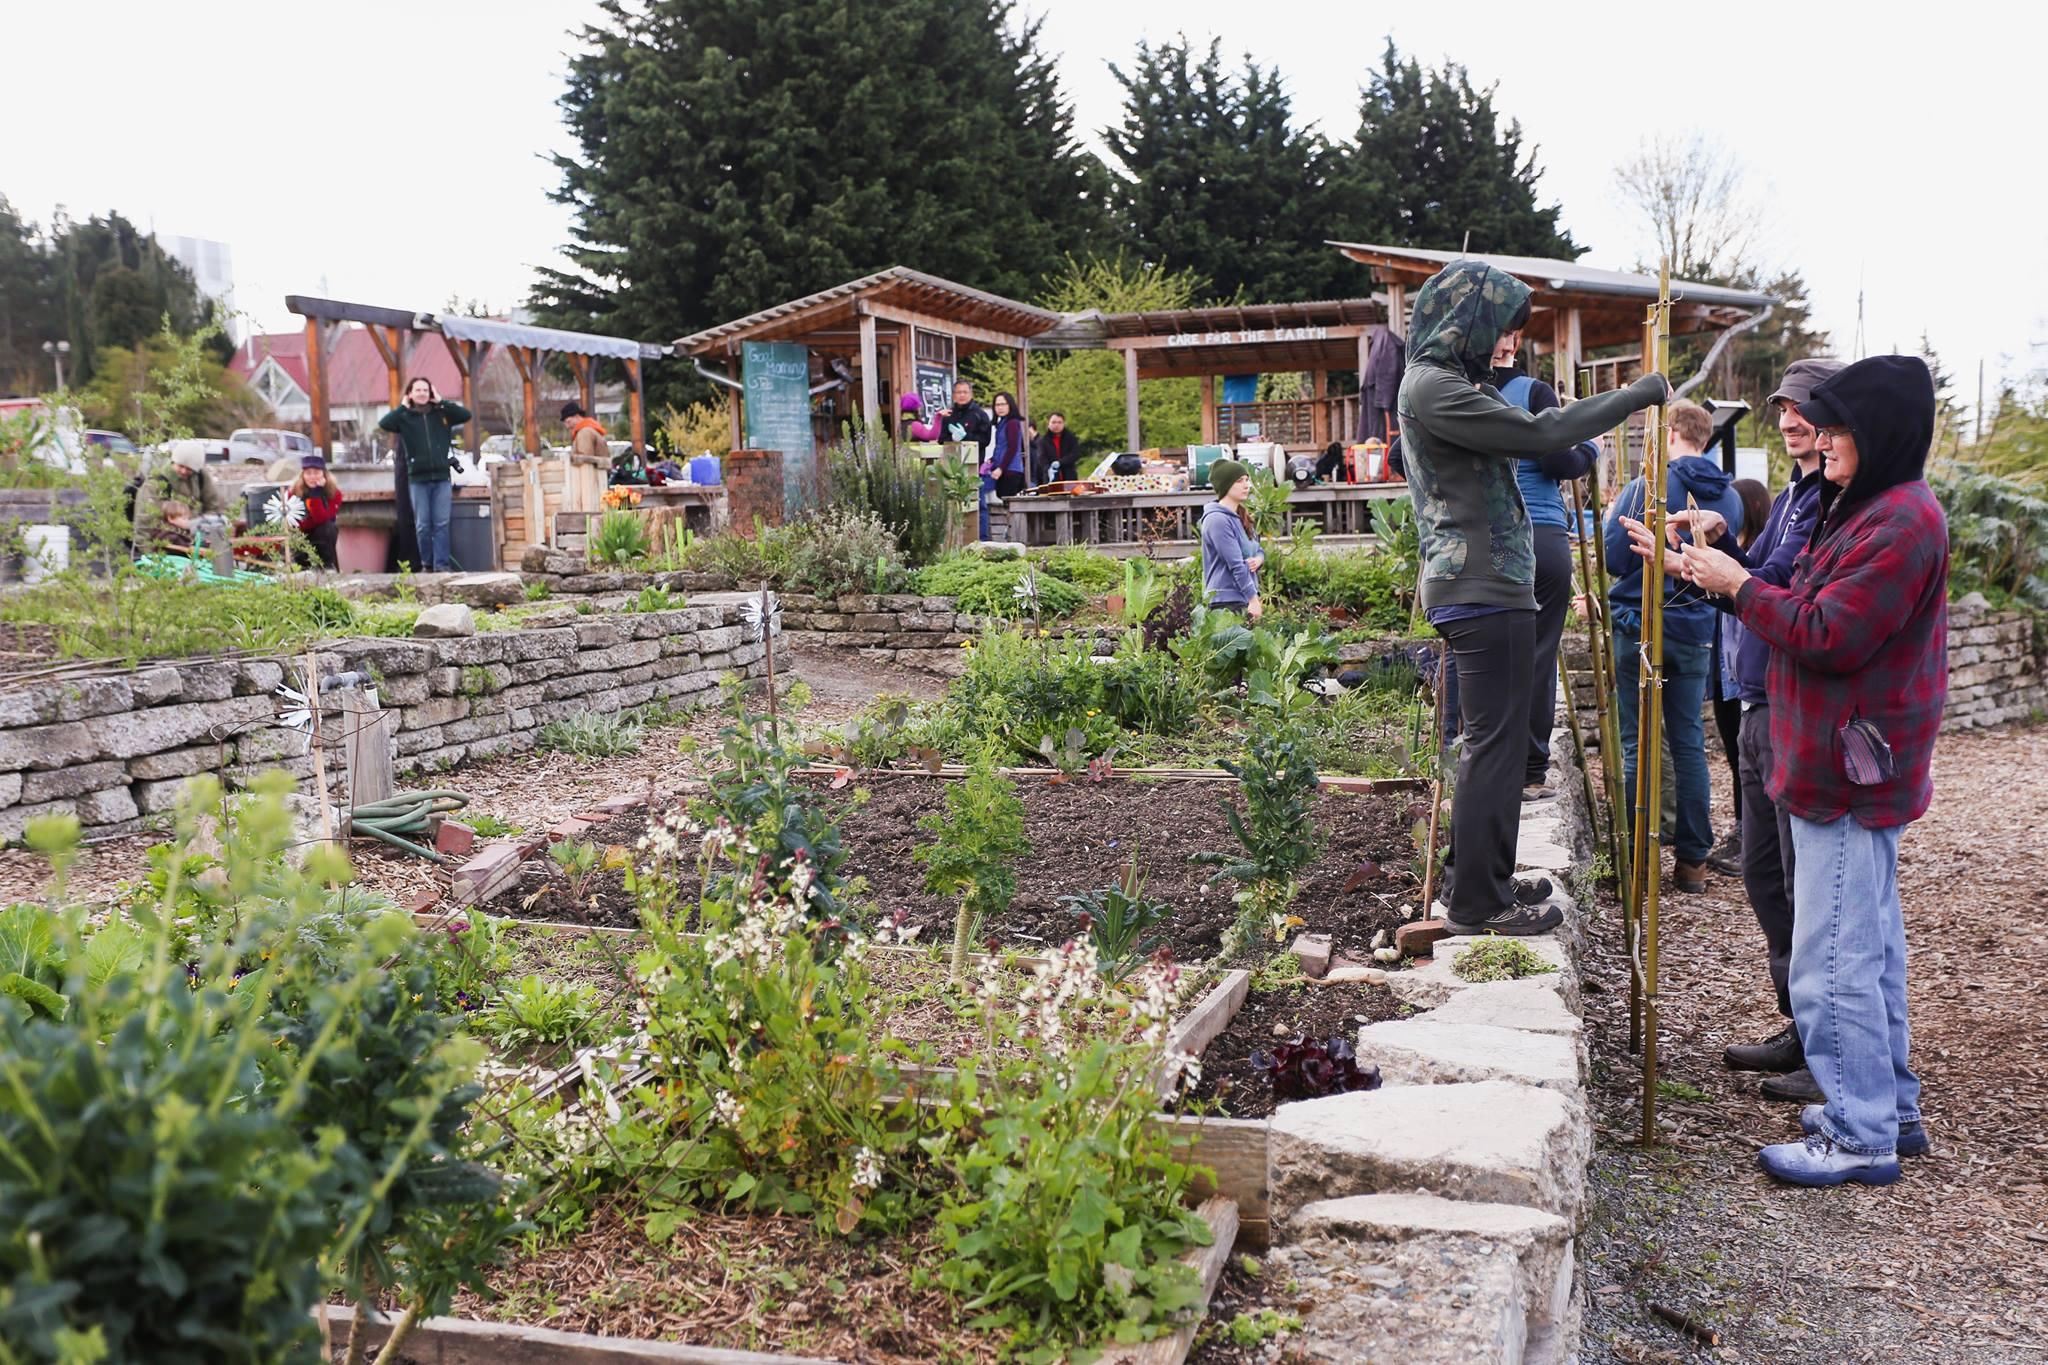 The Beacon Food Forest, located in Seattle (WA), serves as a successful model of edible landscaping in an urban environment.